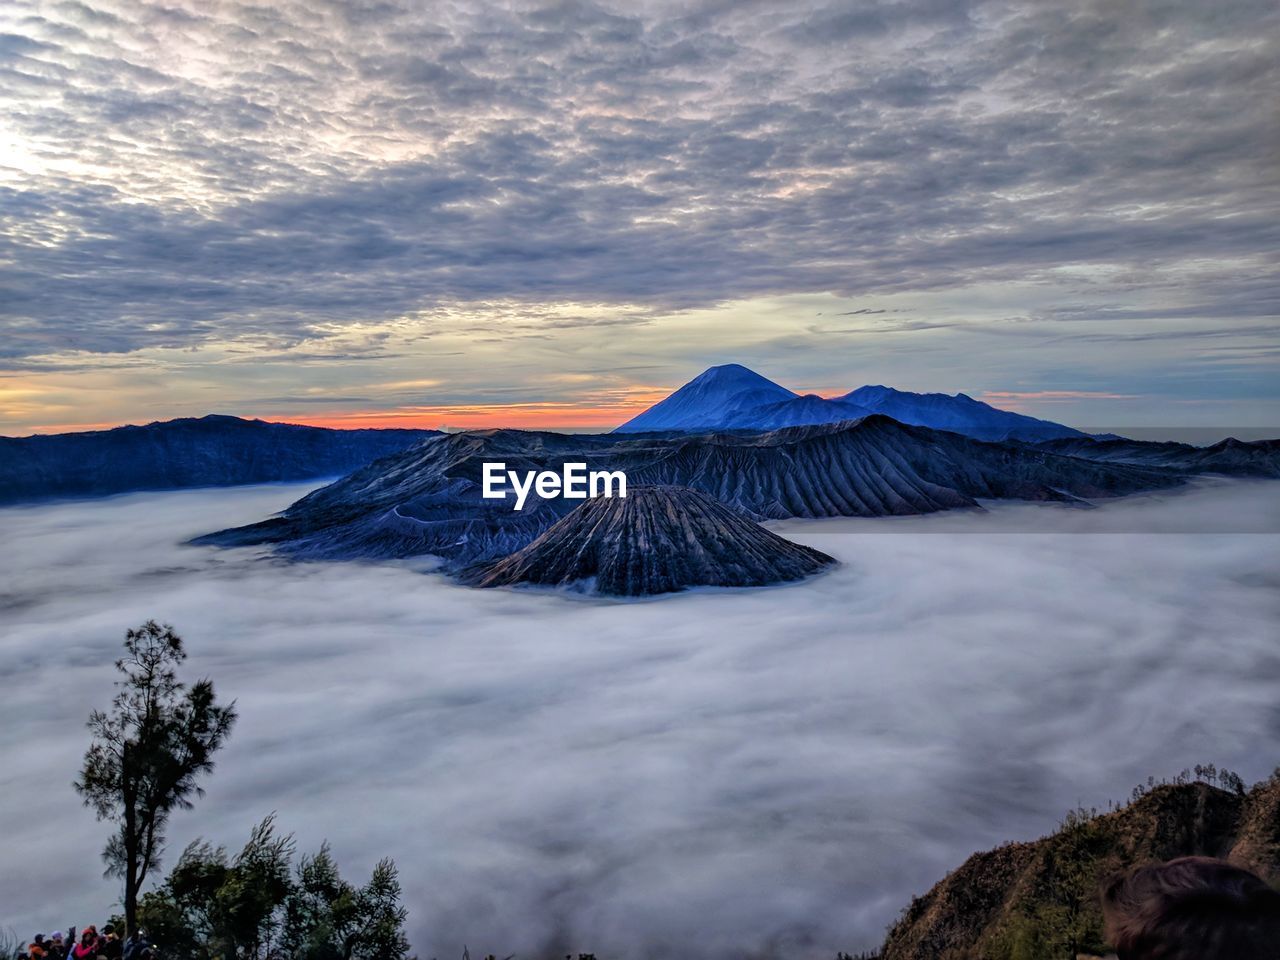 mountain, volcano, sky, landscape, cloud, beauty in nature, scenics - nature, environment, nature, wilderness, travel destinations, land, travel, volcanic landscape, tree, geology, no people, mountain peak, plant, non-urban scene, volcanic crater, outdoors, tourism, sunset, tranquility, tranquil scene, fog, active volcano, dawn, snow, twilight, mountain range, water, stratovolcano, idyllic